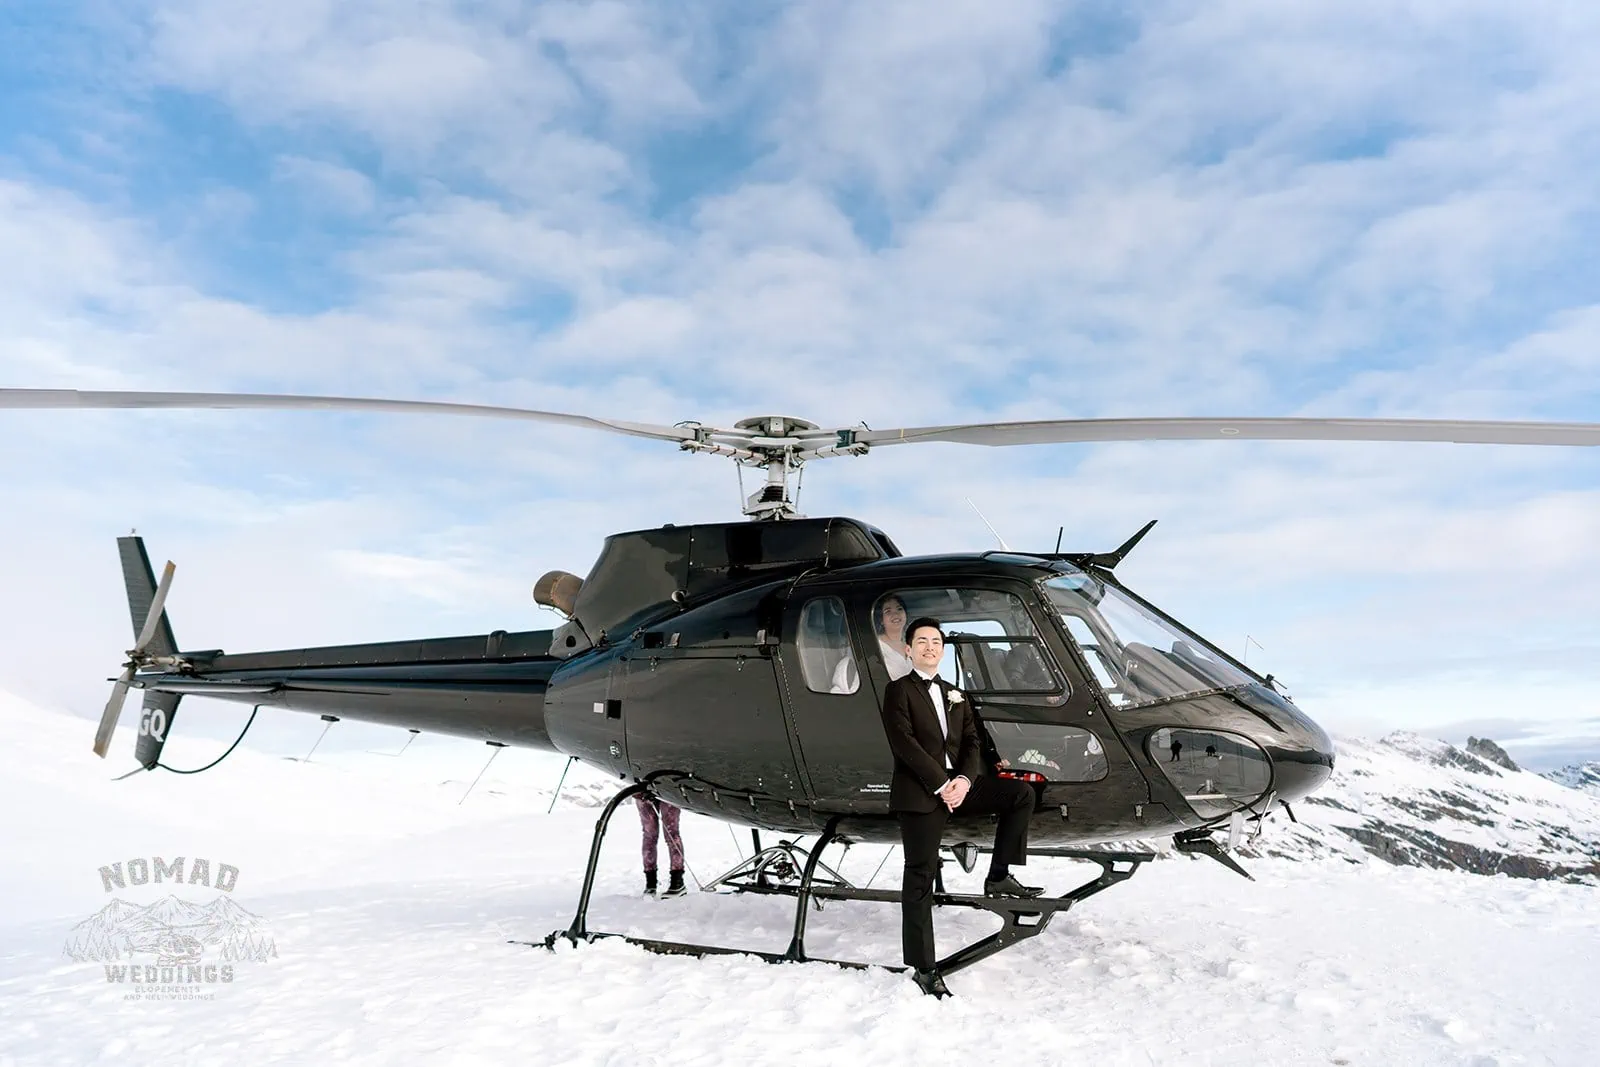 Queenstown New Zealand Elopement Wedding Photographer - Bo and Junyi pose with a helicopter during their snowy pre-wedding shoot, featuring 4 awe-inspiring landings.